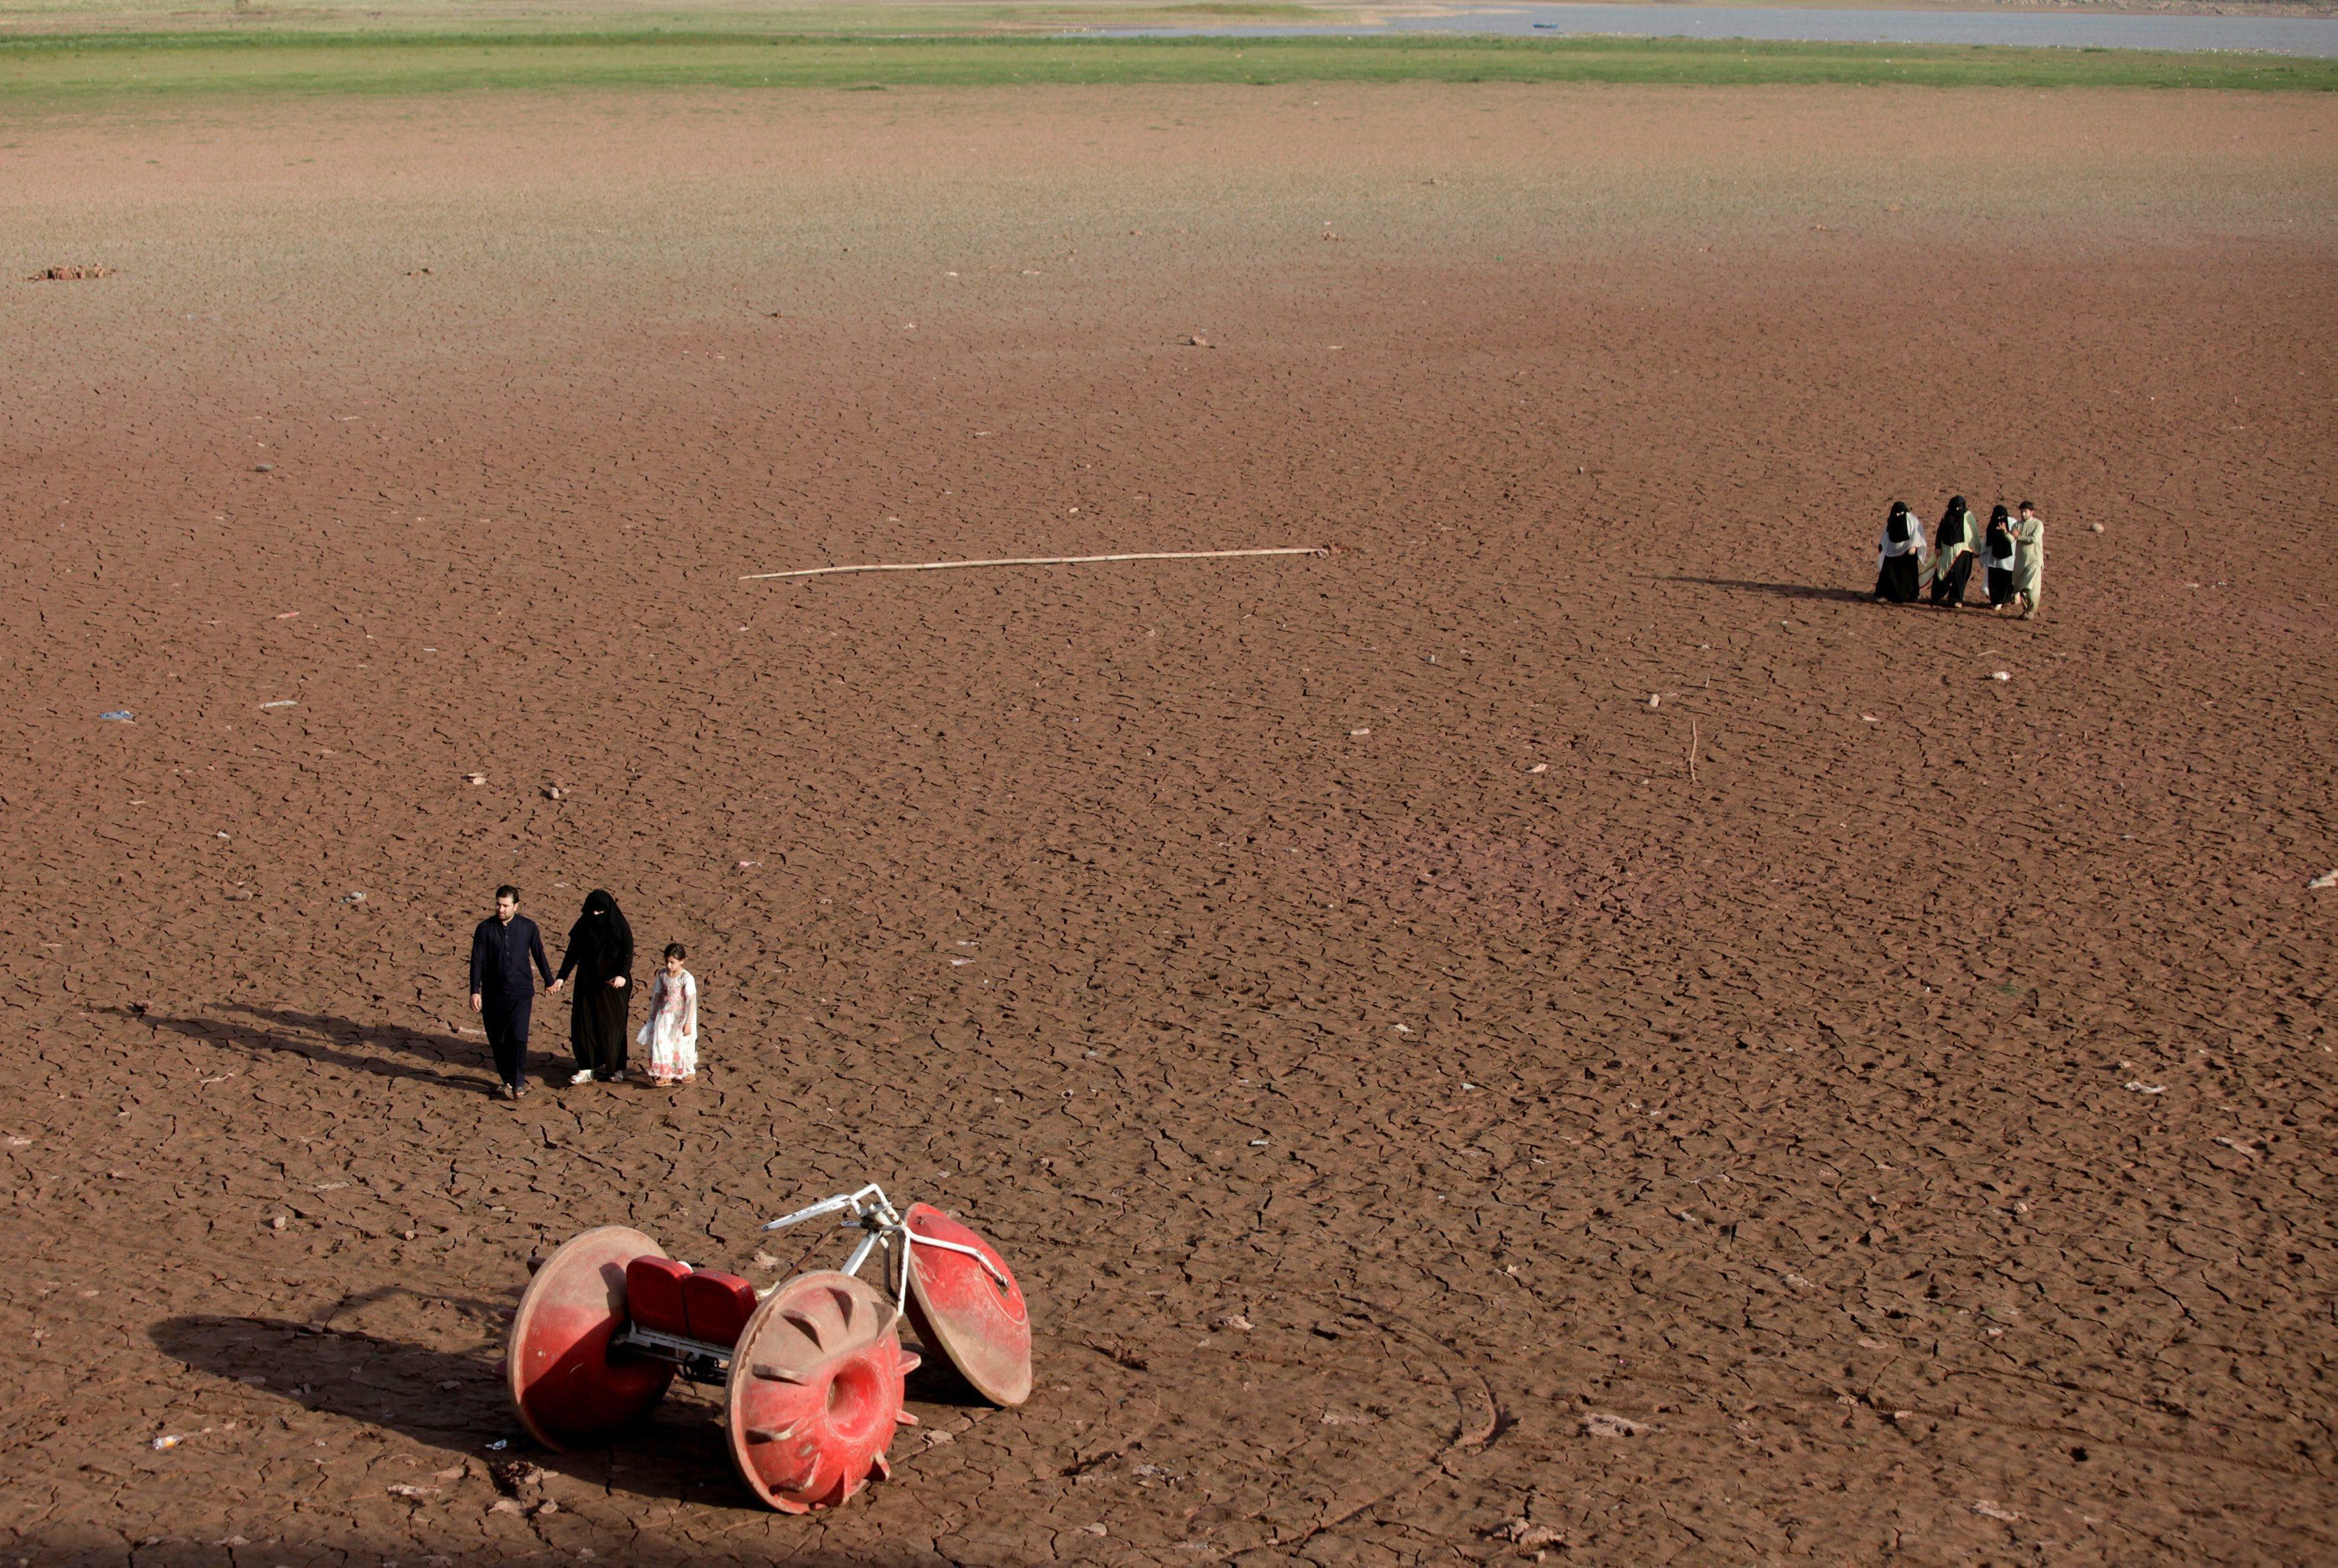 People walk near a three-wheeler parked at a dry portion of land that used to have water, at the ban